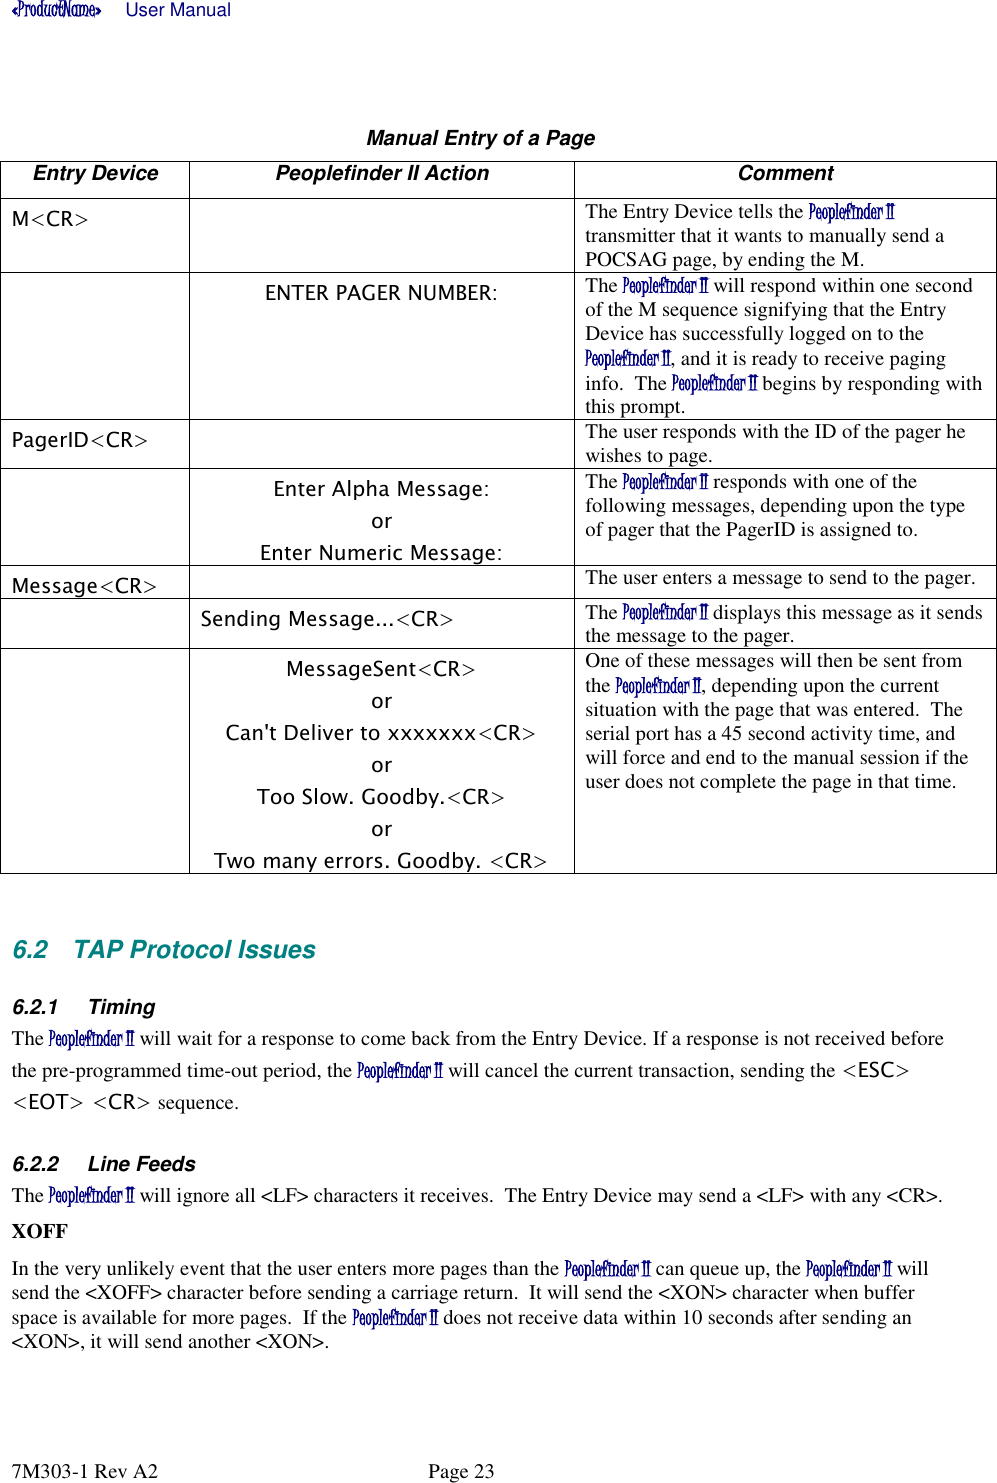 «ProductName»      User Manual      7M303-1 Rev A2  Page 23  Manual Entry of a Page Entry Device Peoplefinder II Action Comment M&lt;CR&gt;  The Entry Device tells the Peoplefinder II transmitter that it wants to manually send a POCSAG page, by ending the M.   ENTER PAGER NUMBER: The Peoplefinder II will respond within one second of the M sequence signifying that the Entry Device has successfully logged on to the Peoplefinder II, and it is ready to receive paging info.  The Peoplefinder II begins by responding with this prompt.  PagerID&lt;CR&gt;  The user responds with the ID of the pager he wishes to page.    Enter Alpha Message: or Enter Numeric Message: The Peoplefinder II responds with one of the following messages, depending upon the type of pager that the PagerID is assigned to. Message&lt;CR&gt;  The user enters a message to send to the pager.  Sending Message...&lt;CR&gt; The Peoplefinder II displays this message as it sends the message to the pager.   MessageSent&lt;CR&gt; or Can&apos;t Deliver to xxxxxxx&lt;CR&gt; or Too Slow. Goodby.&lt;CR&gt; or Two many errors. Goodby. &lt;CR&gt; One of these messages will then be sent from the Peoplefinder II, depending upon the current situation with the page that was entered.  The serial port has a 45 second activity time, and will force and end to the manual session if the user does not complete the page in that time.   6.2  TAP Protocol Issues 6.2.1  Timing The Peoplefinder II will wait for a response to come back from the Entry Device. If a response is not received before the pre-programmed time-out period, the Peoplefinder II will cancel the current transaction, sending the &lt;ESC&gt; &lt;EOT&gt; &lt;CR&gt; sequence. 6.2.2  Line Feeds The Peoplefinder II will ignore all &lt;LF&gt; characters it receives.  The Entry Device may send a &lt;LF&gt; with any &lt;CR&gt;. XOFF In the very unlikely event that the user enters more pages than the Peoplefinder II can queue up, the Peoplefinder II will send the &lt;XOFF&gt; character before sending a carriage return.  It will send the &lt;XON&gt; character when buffer space is available for more pages.  If the Peoplefinder II does not receive data within 10 seconds after sending an &lt;XON&gt;, it will send another &lt;XON&gt;.  